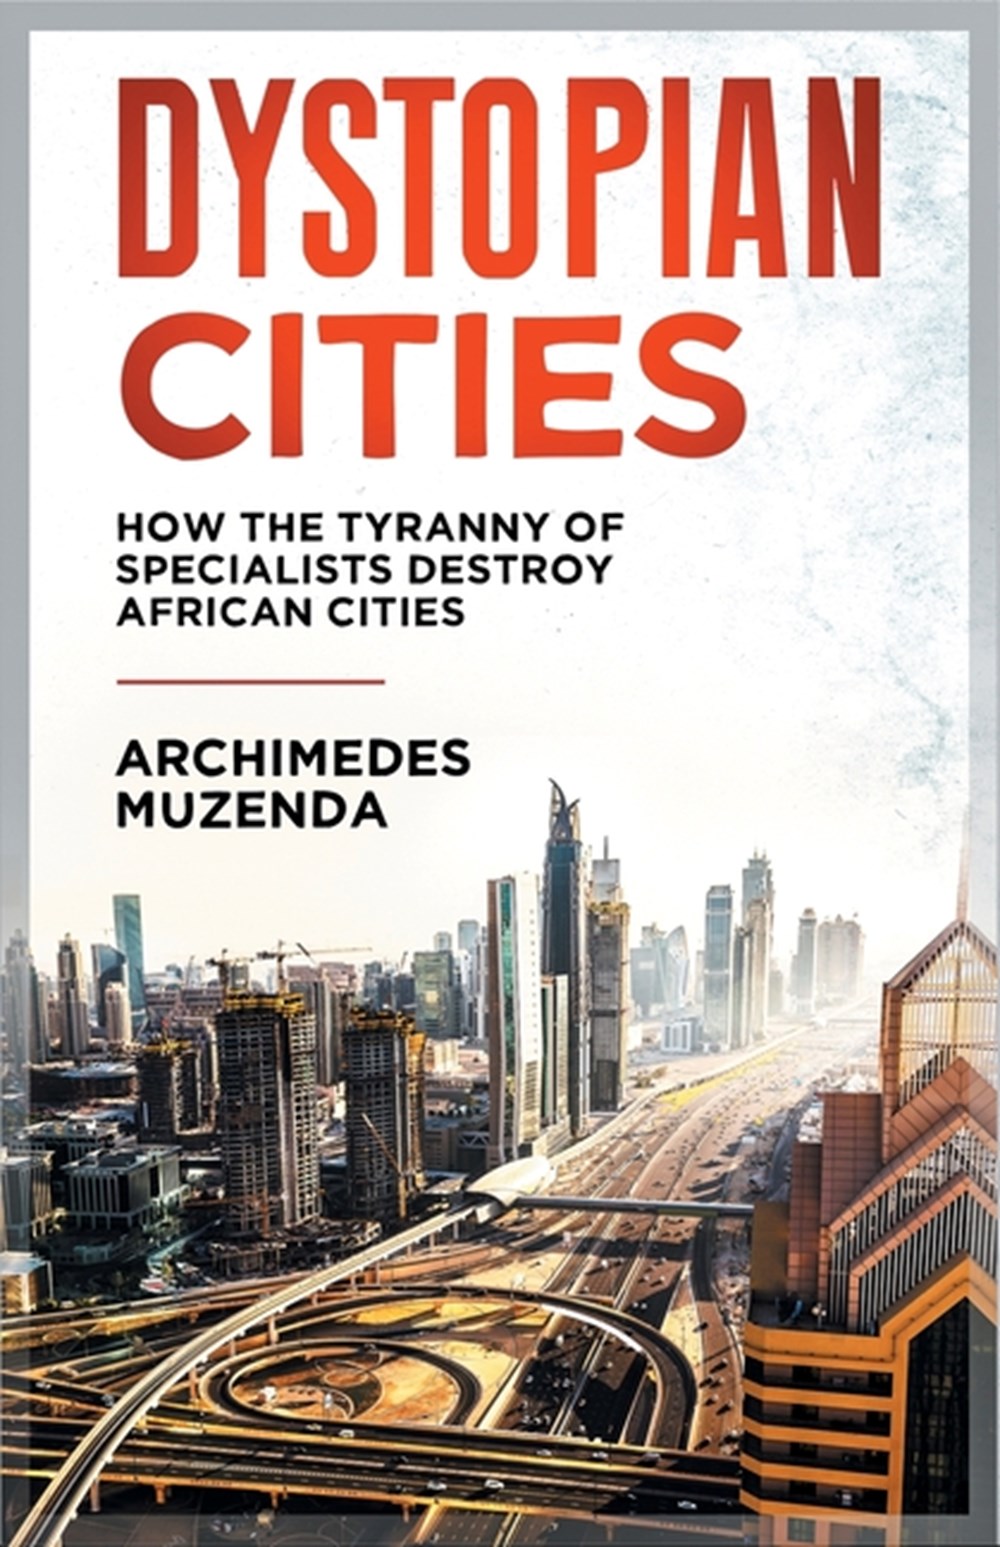 Dystopia: How the Tyranny of Specialists Destroy African Cities